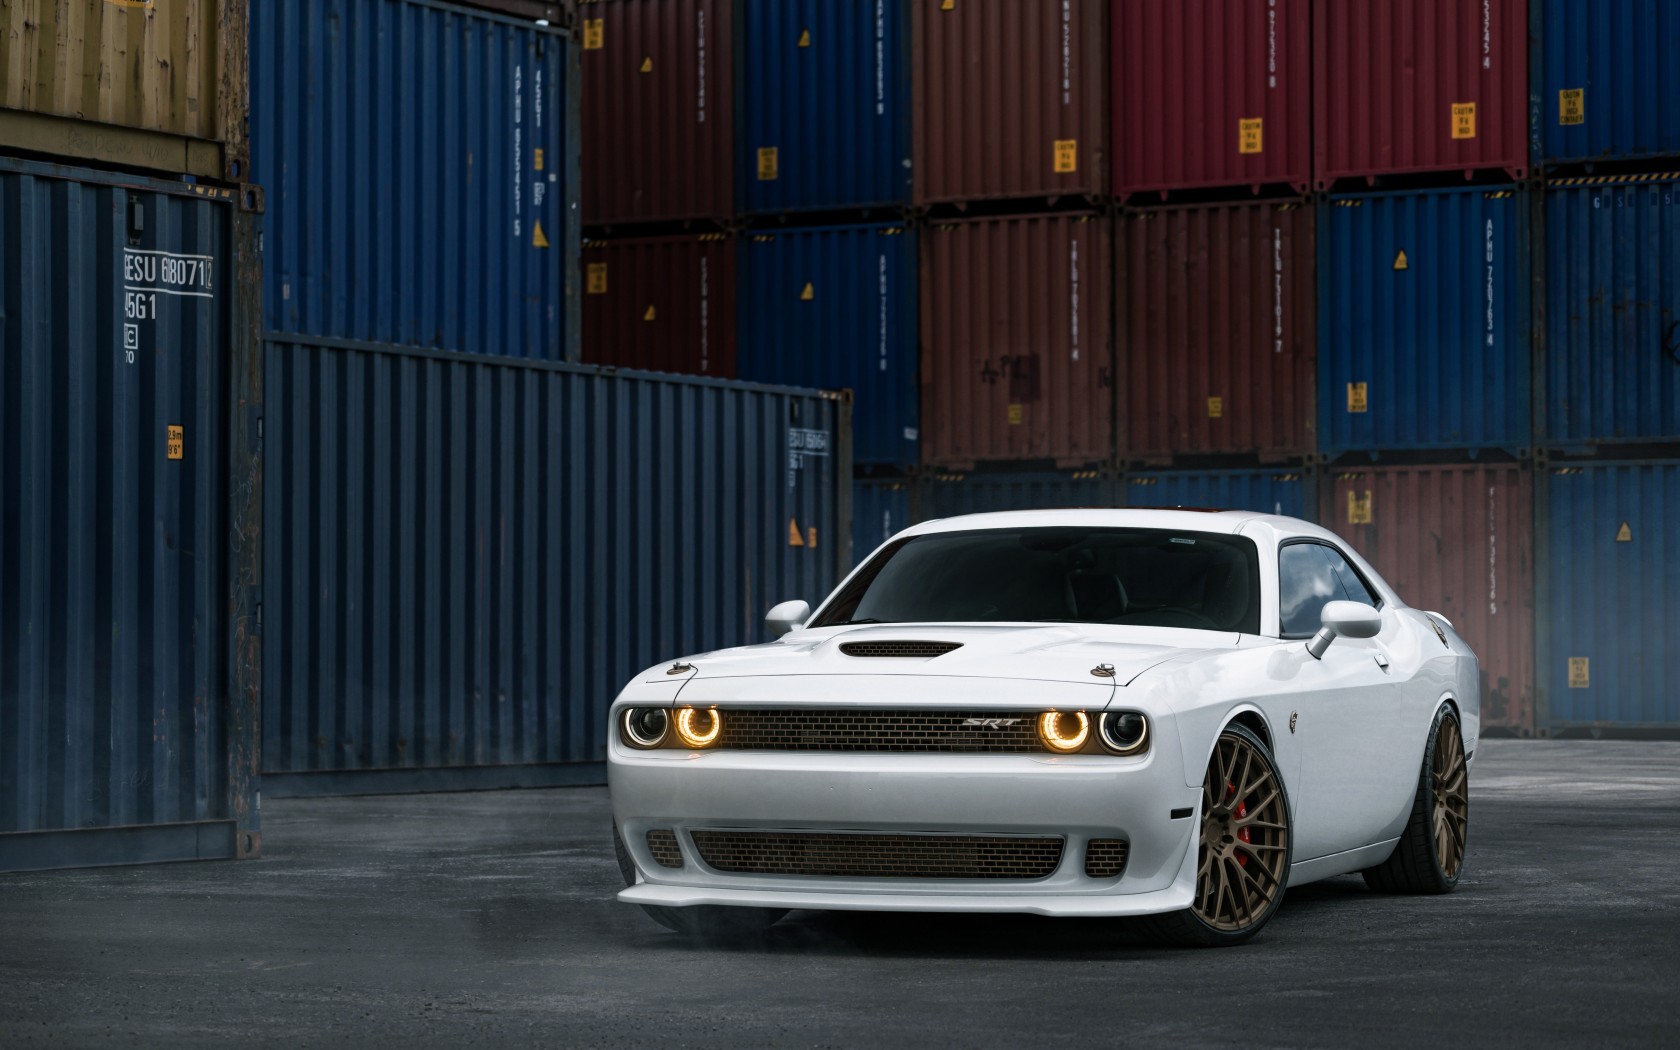 General 1680x1050 car washes white cars Dodge Challenger Dodge muscle cars American cars Stellantis V8 engine